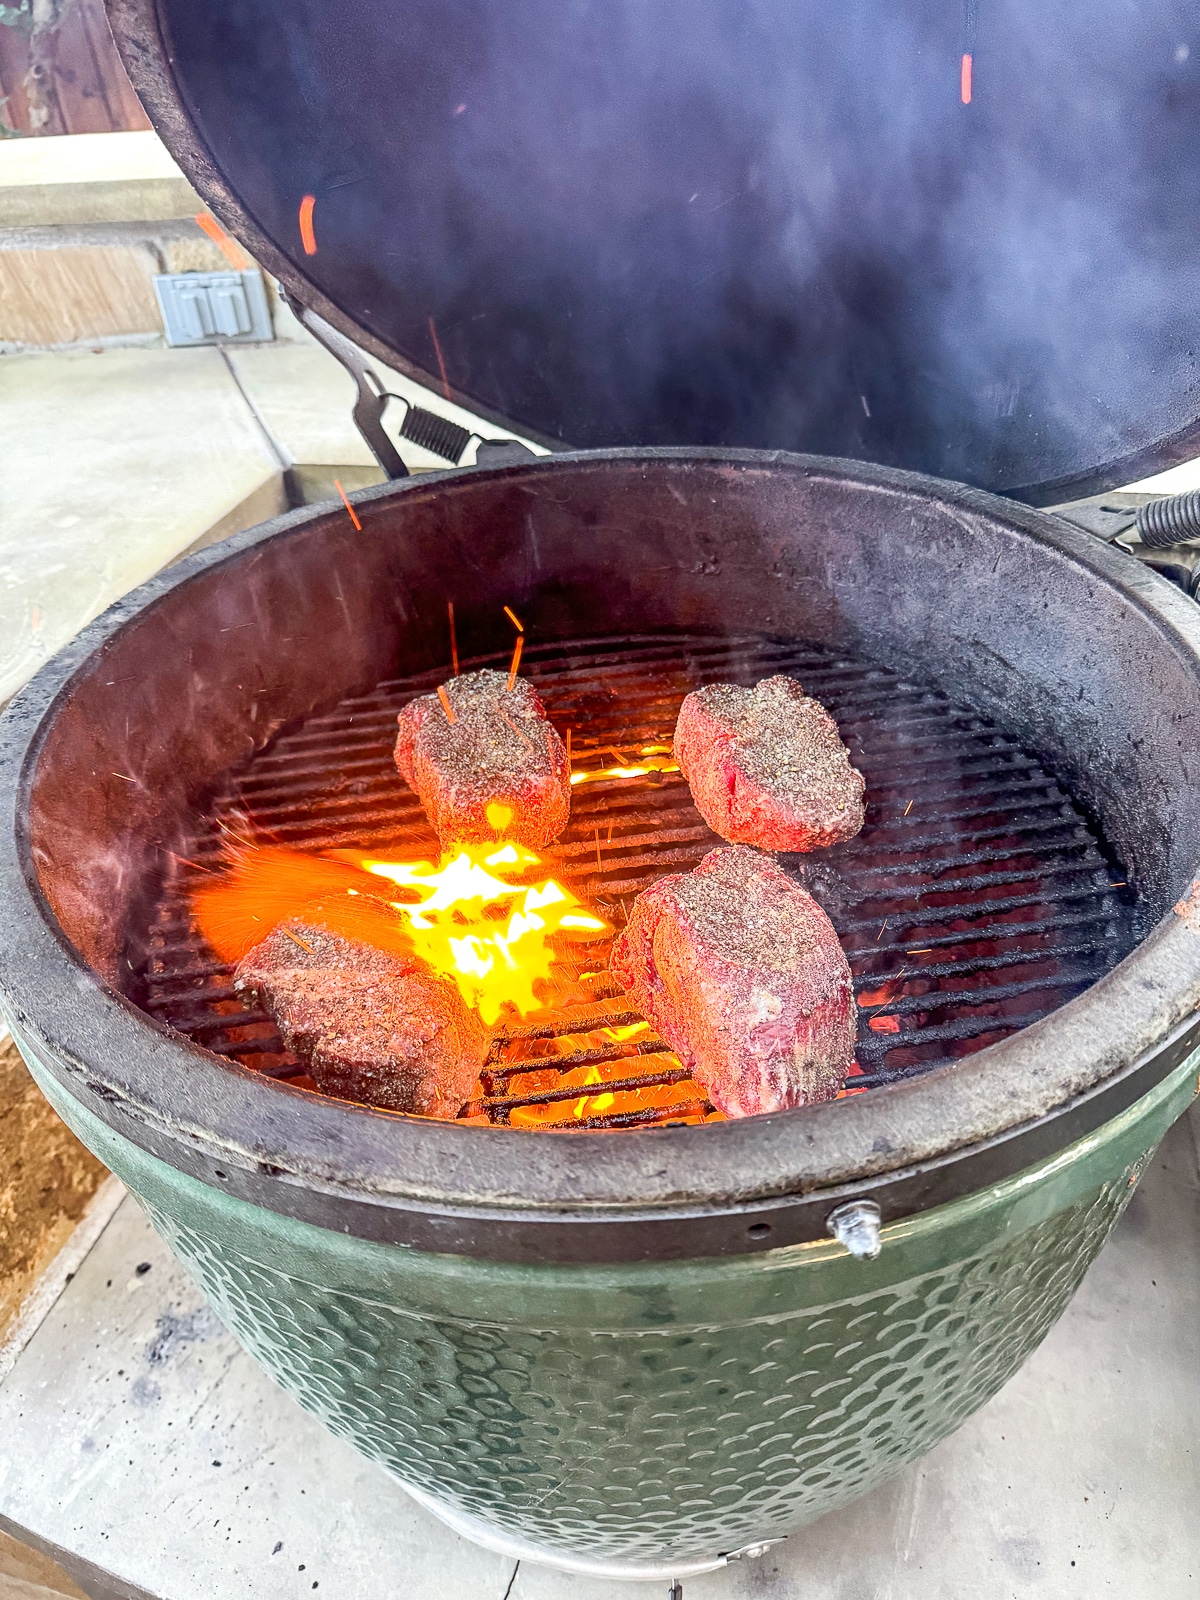 Overhead view of a Big Green Egg with four filets on it over a very hot fire.